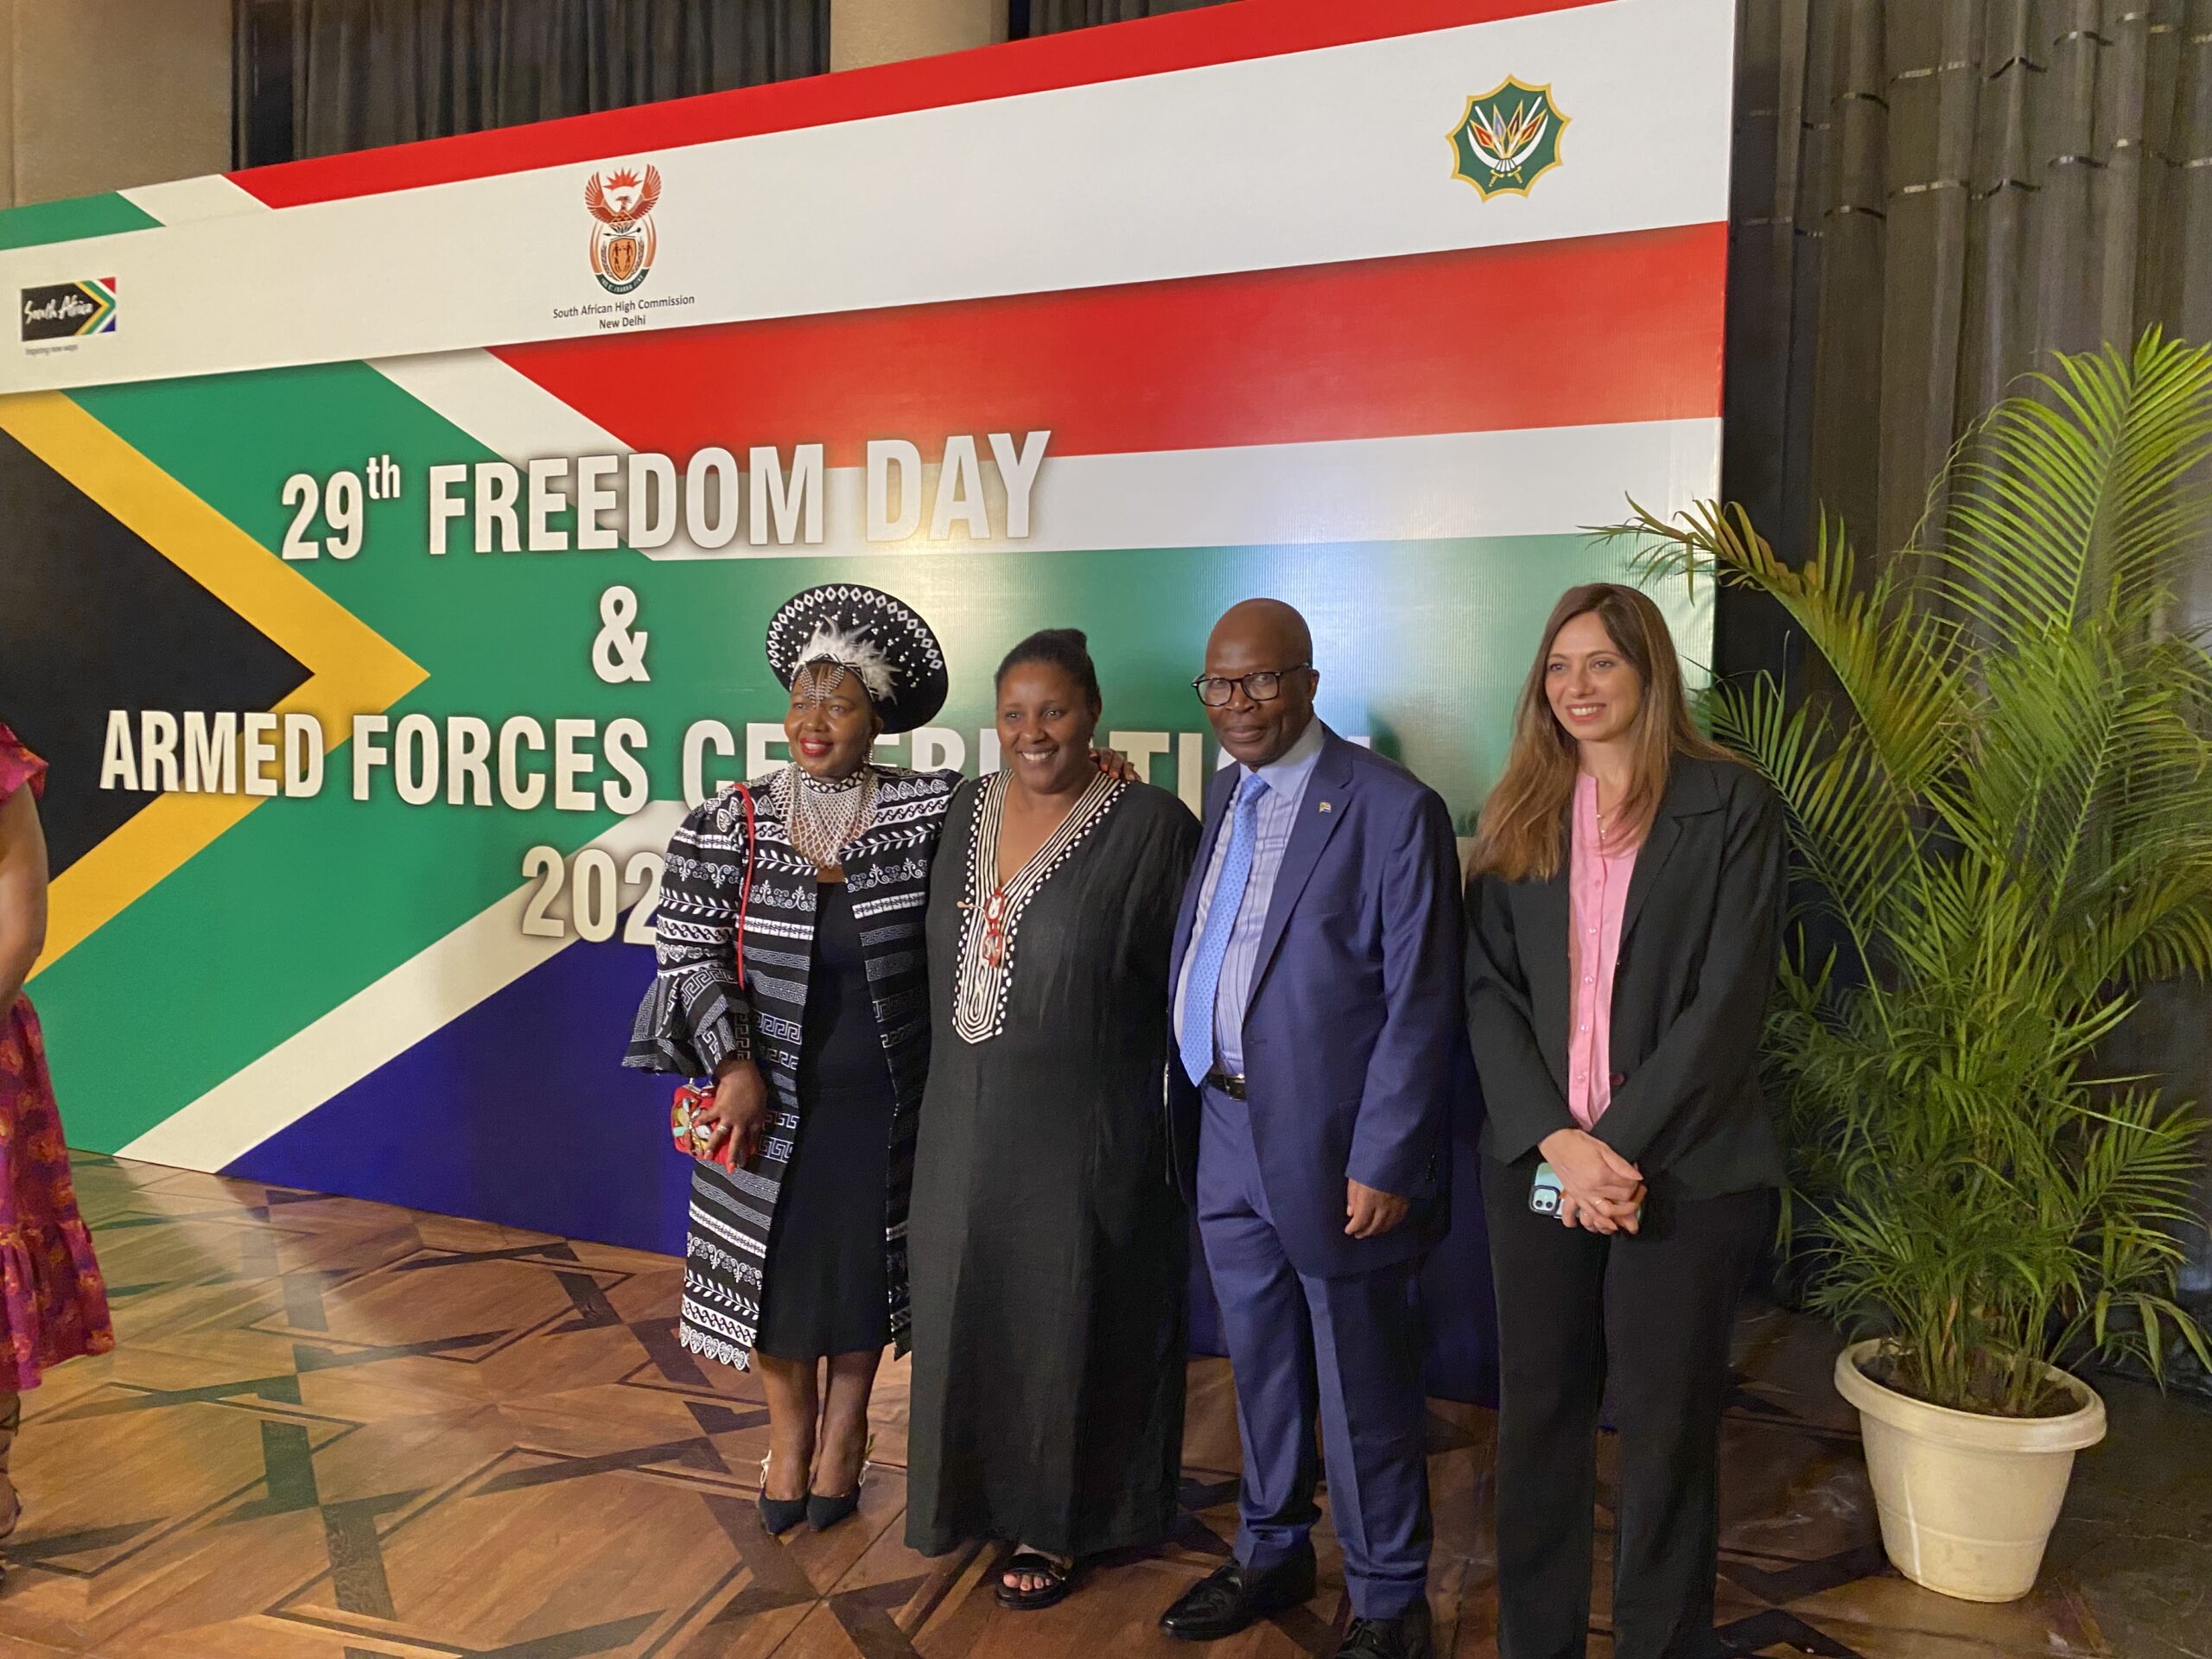 South Africa’s 29th Freedom Day celebrations in New Delhi